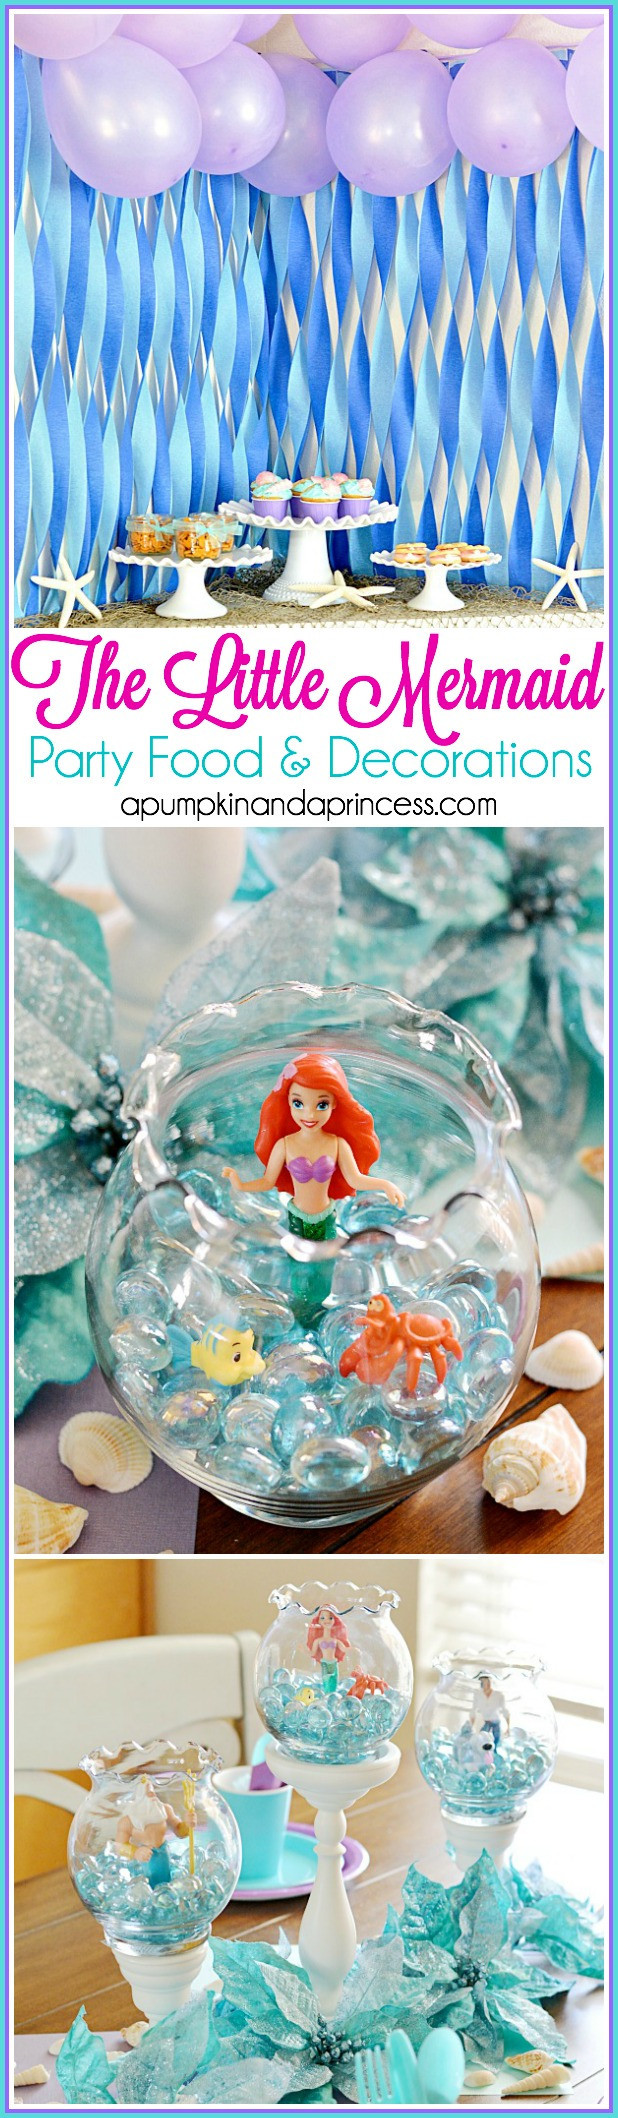 The Little Mermaid Party Ideas
 The Little Mermaid Party A Pumpkin And A Princess